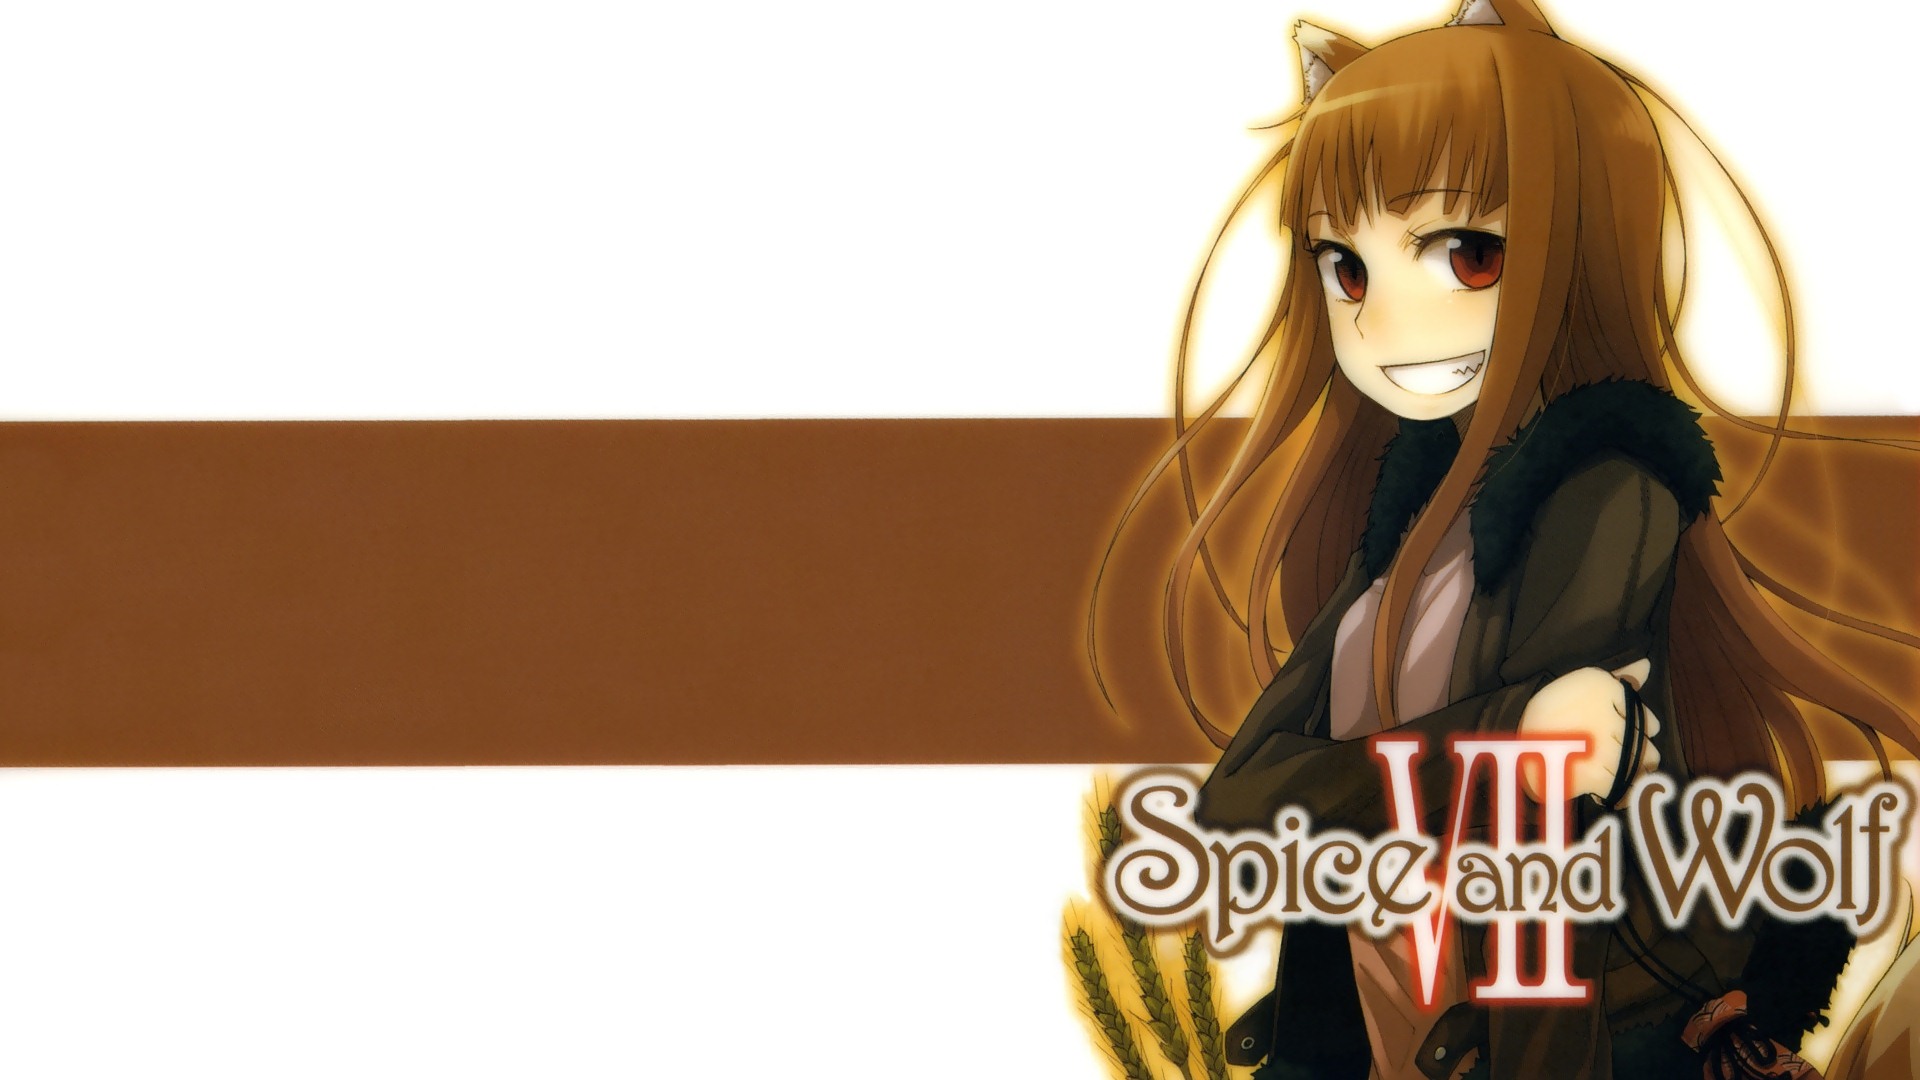 Spice and Wolf HD wallpapers #4 - 1920x1080